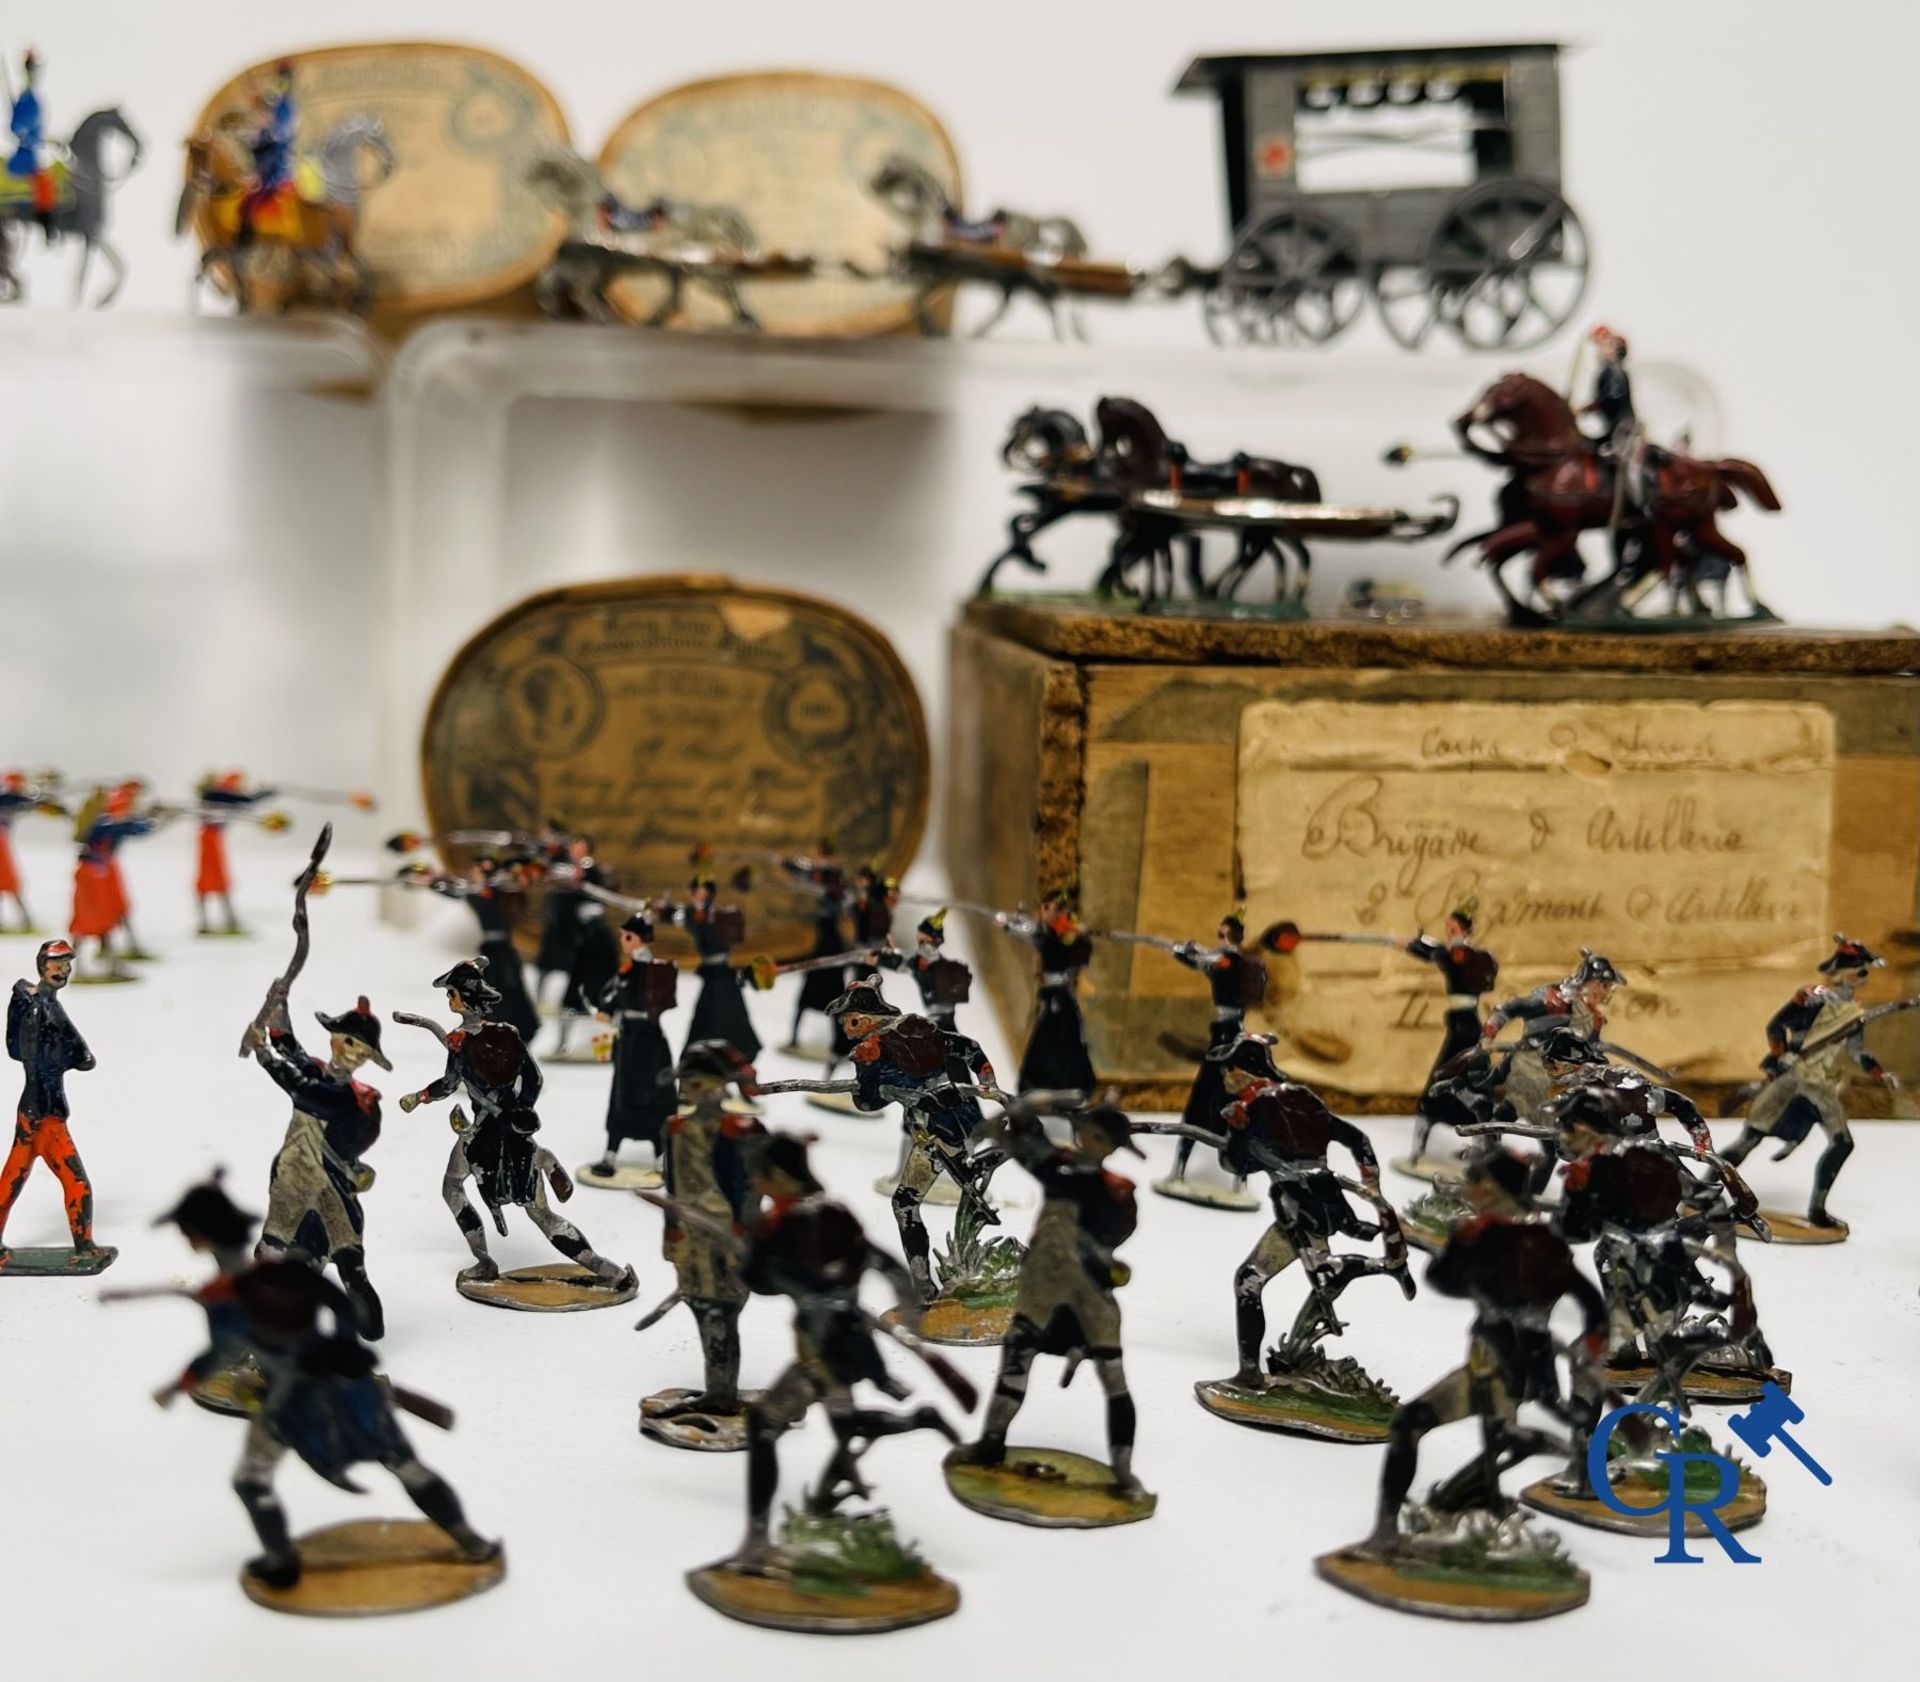 Antique toys: Large lot of tin soldiers and carriages. Heinrichsen in Nuremberg. - Image 10 of 15